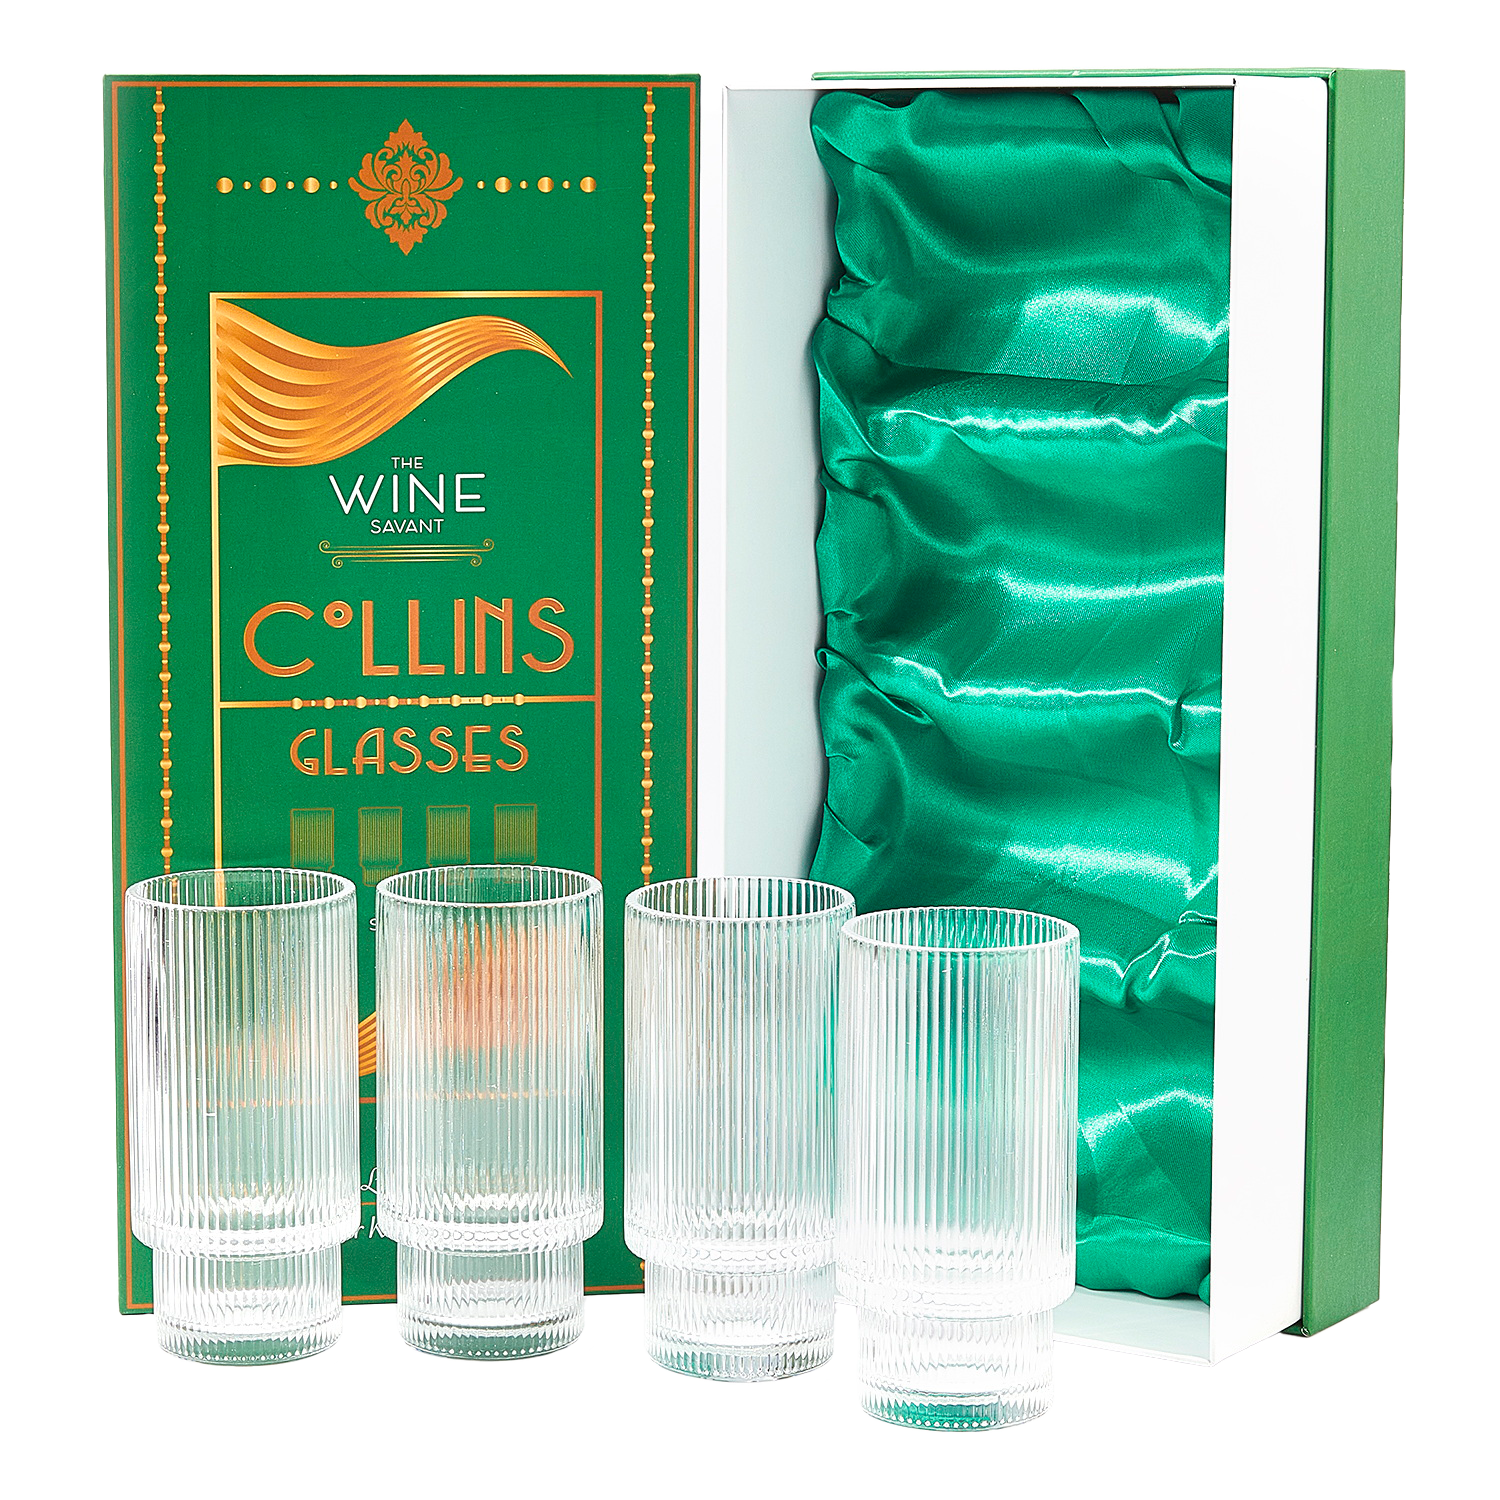 Vintage Art Deco Crystal Highball Ribbed Glass Set of 4 - Ripple, Collins Glassware 14oz Classic Crystal Cocktail Glasses Perfect for Water, Champagne, Beer, Juice, Tom Cocktails - Barware Tumblers-0